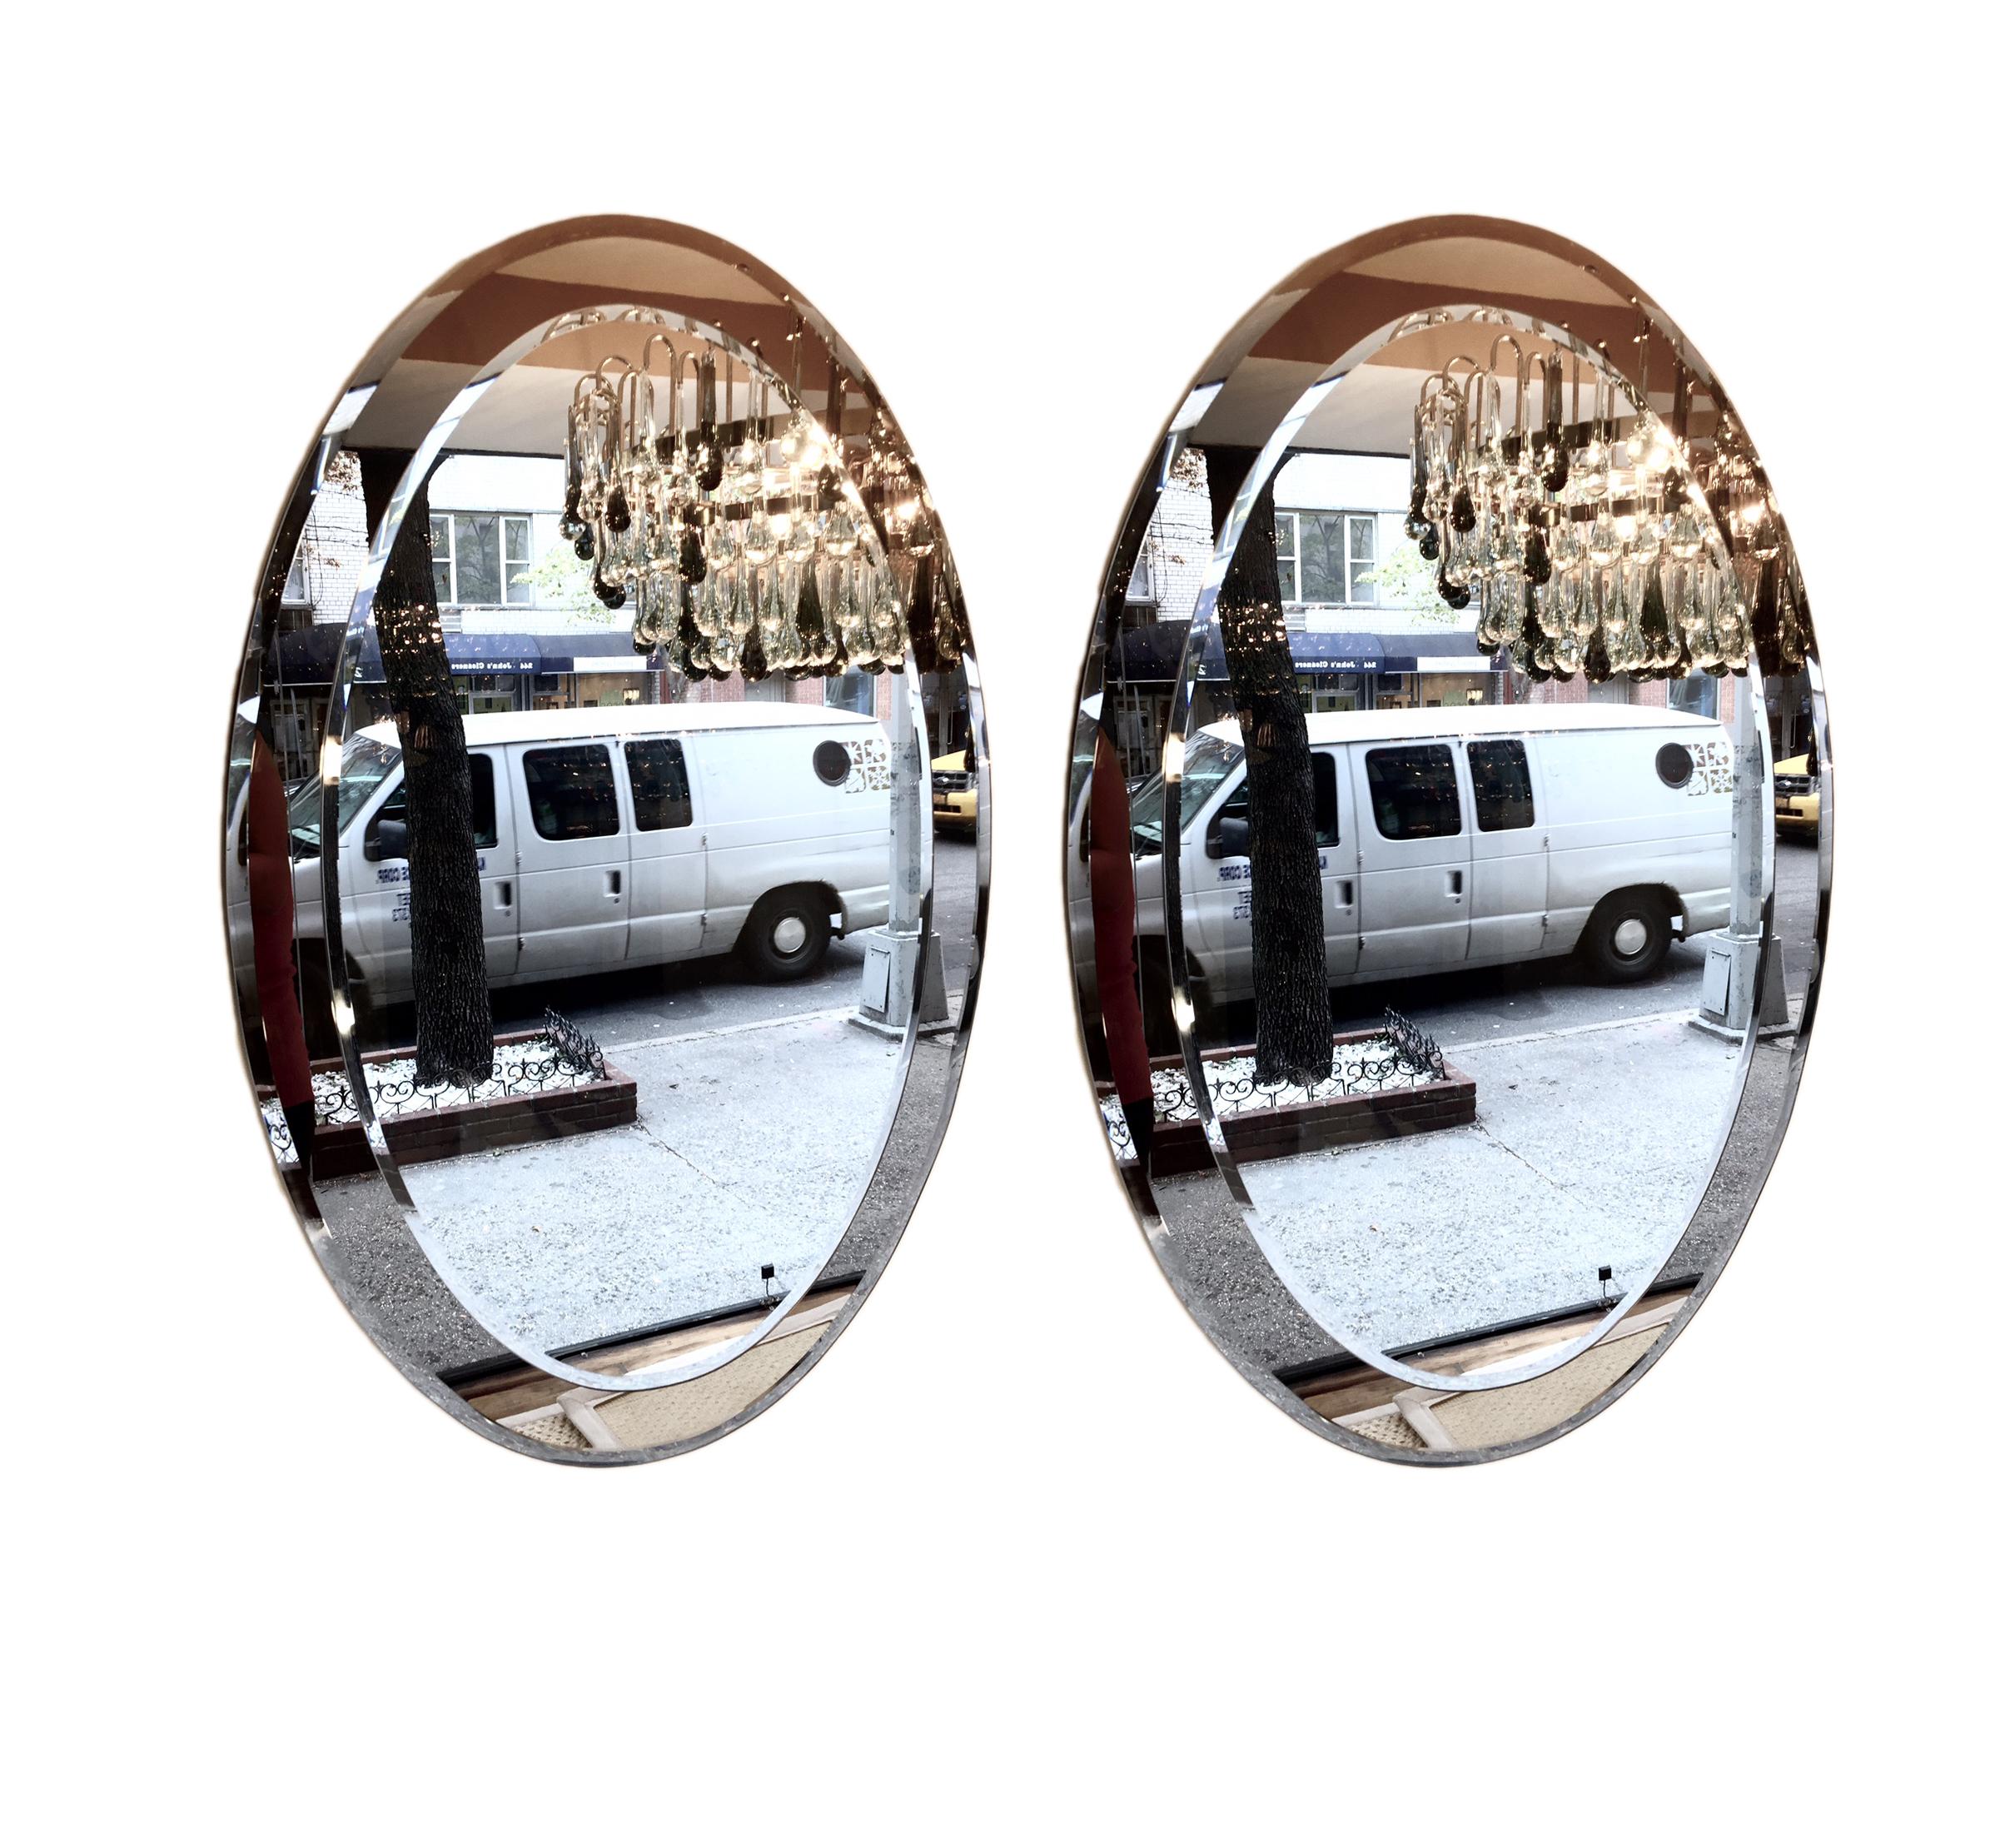 A pair of circa 1960’s Italian oval mirror with bronze colored mirror frame. Sold Individually.

Measurements:
Height: 36